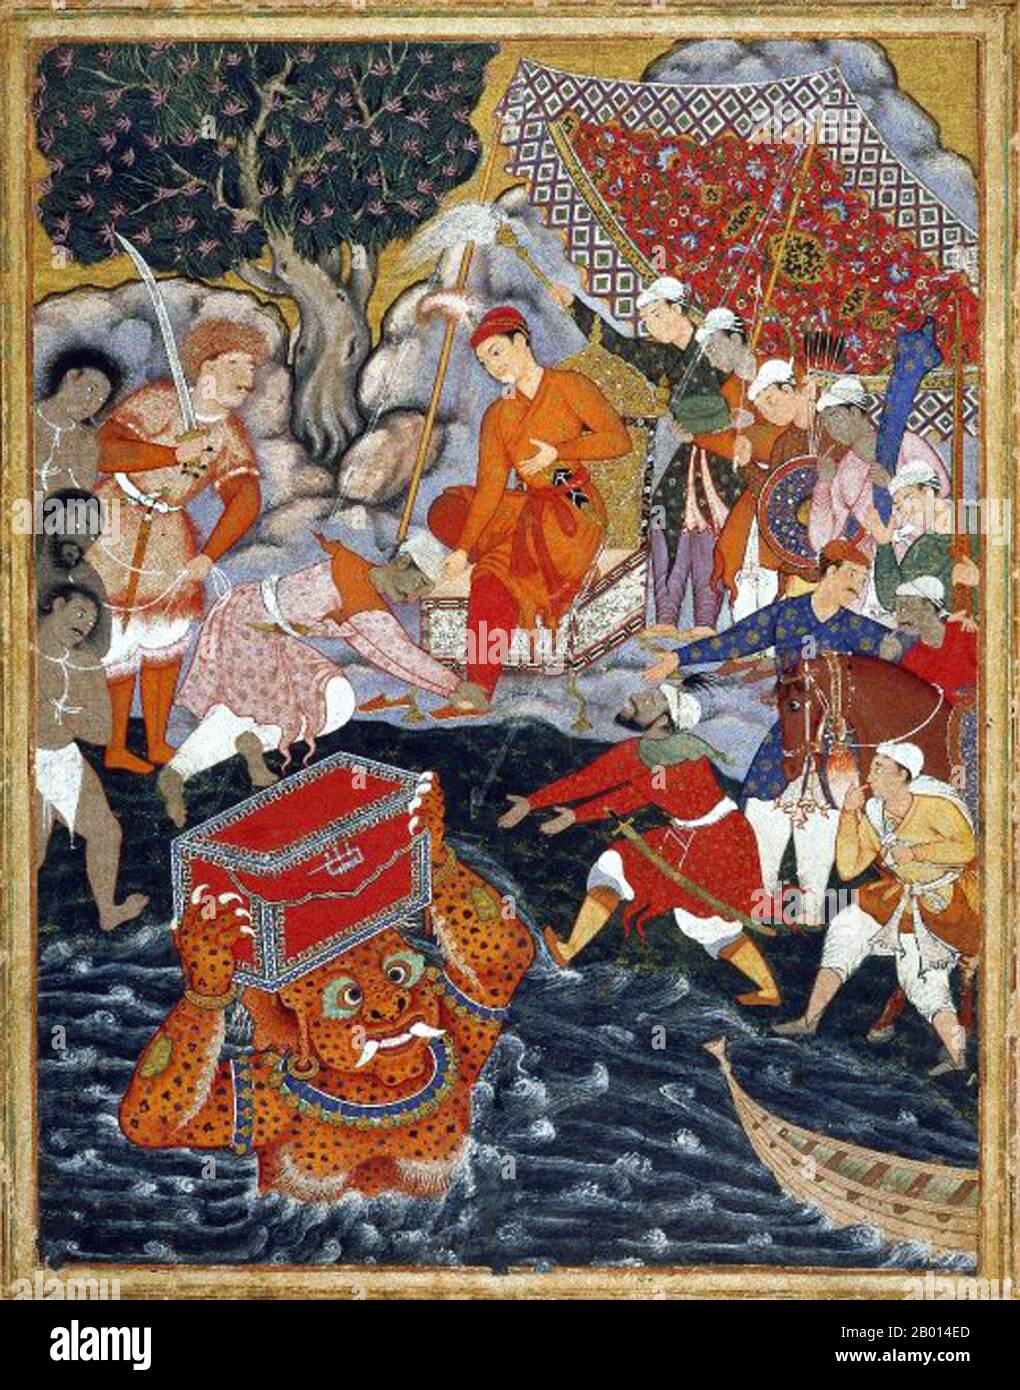 India: 'Arghan Div Brings the Chest of Armour to Hamza'. Gouache and gold painting depicting a scene from the Hamzanama, c. 1562-1577.  The Hamzanama or Dastan-e-Amir Hamza (Adventures of Amir Hamza) narrates the mythical exploits of Amir Hamza, the uncle of the prophet of Islam. Most of the story is extremely fanciful, memorably described by the first Moghul Emperor Babur as: 'one long far-fetched lie, opposed to sense and nature'. Yet the Hamzanama proved enduringly popular with Babur's grandson, the third Mughal Emperor Akbar, who commissioned a magnificent illustrated version of the epic. Stock Photo